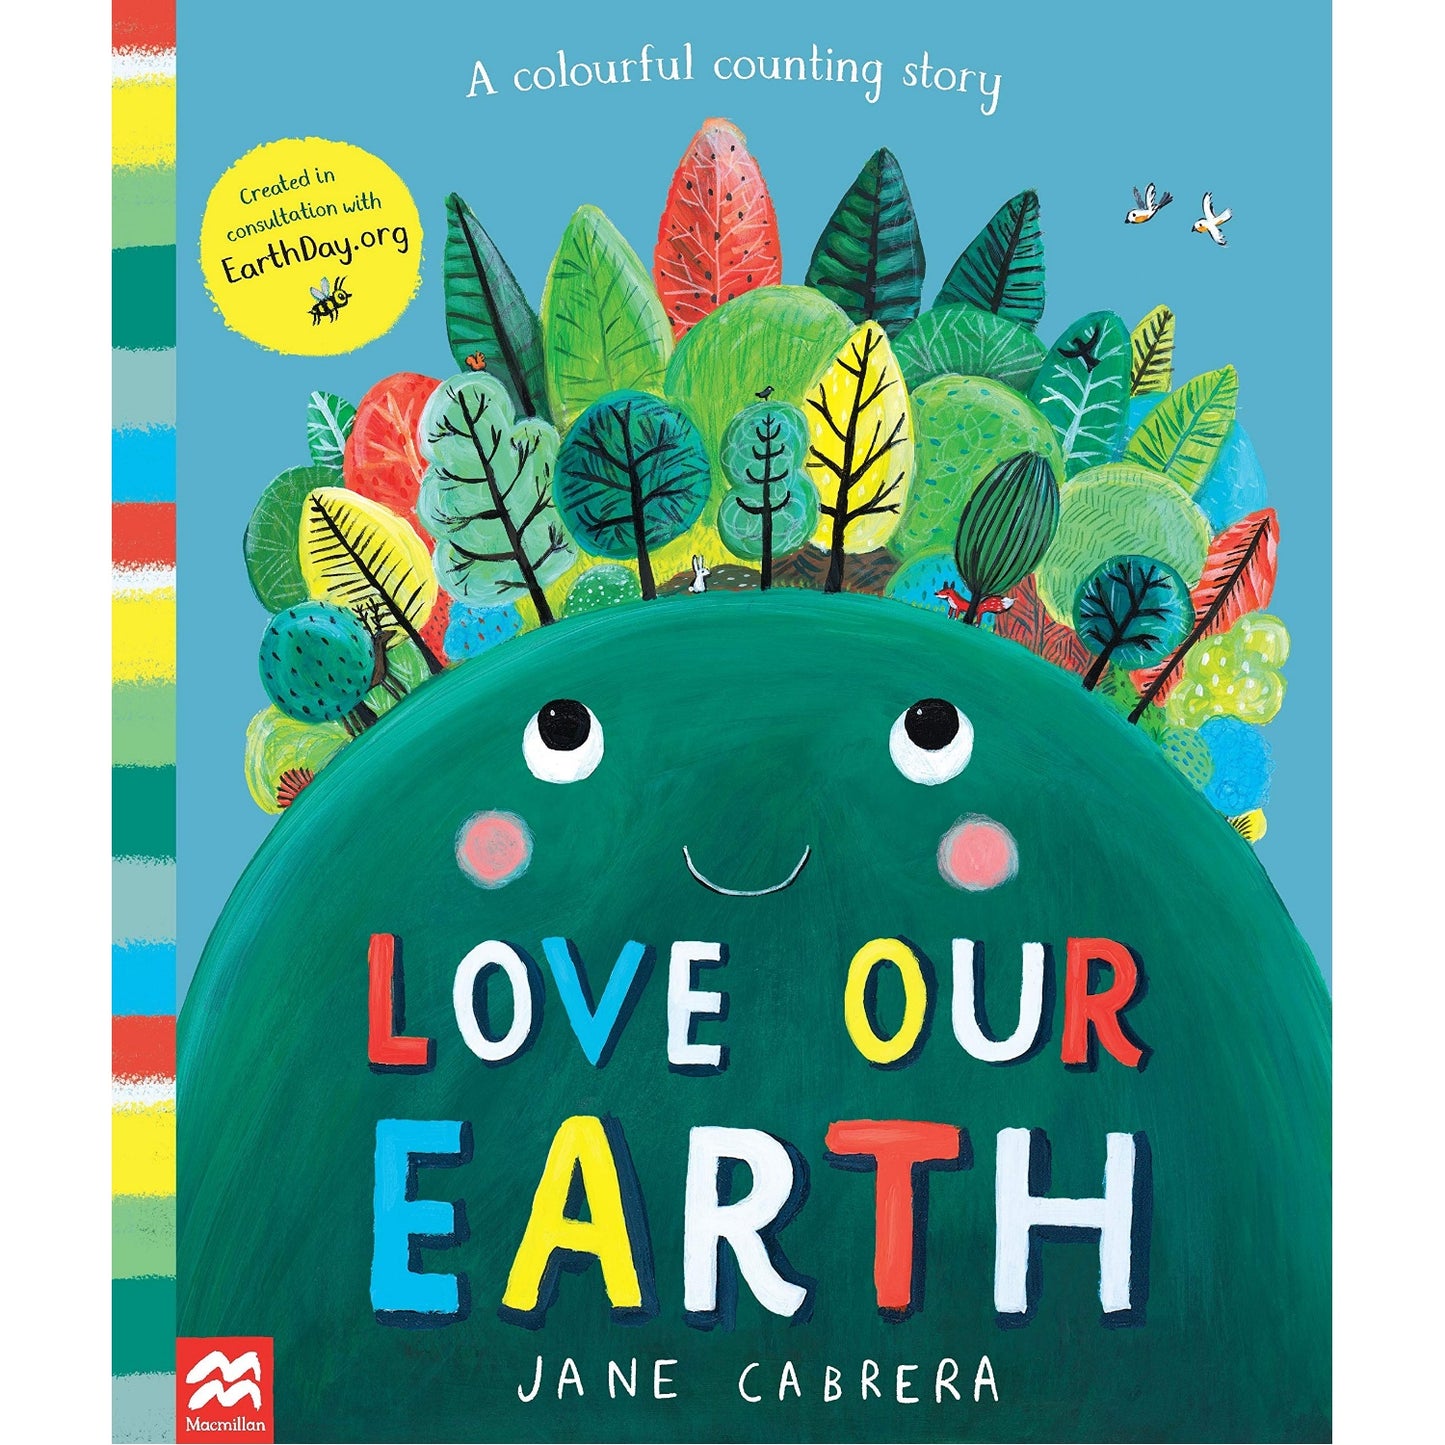 Love Our Earth | Children's Book on Nature & the Environment